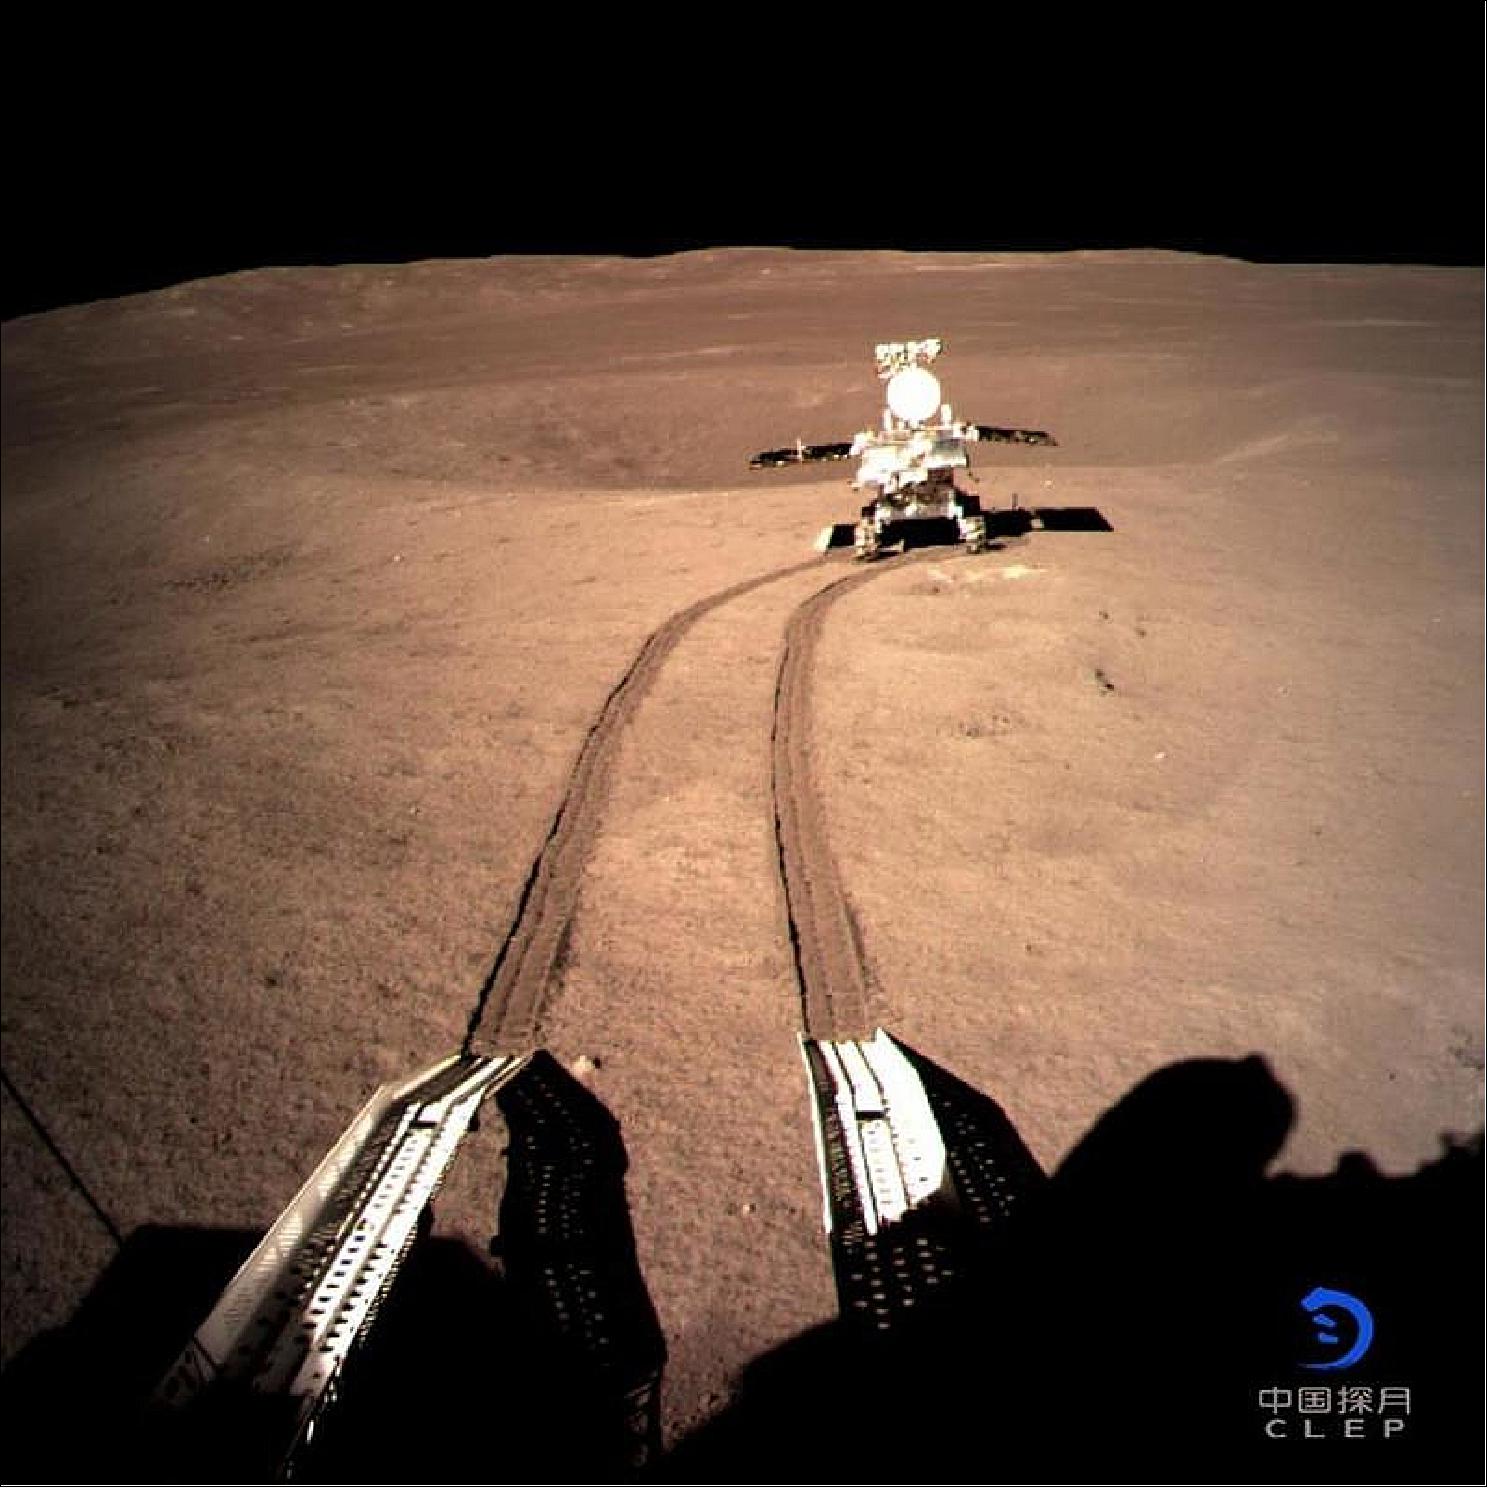 Figure 28: Photo provided by CNSA on 4 January 2019 shows image of Yutu-2, China's lunar rover, at preset location A on the surface of the far side of the moon (image credit: Xinhua, CNSA)